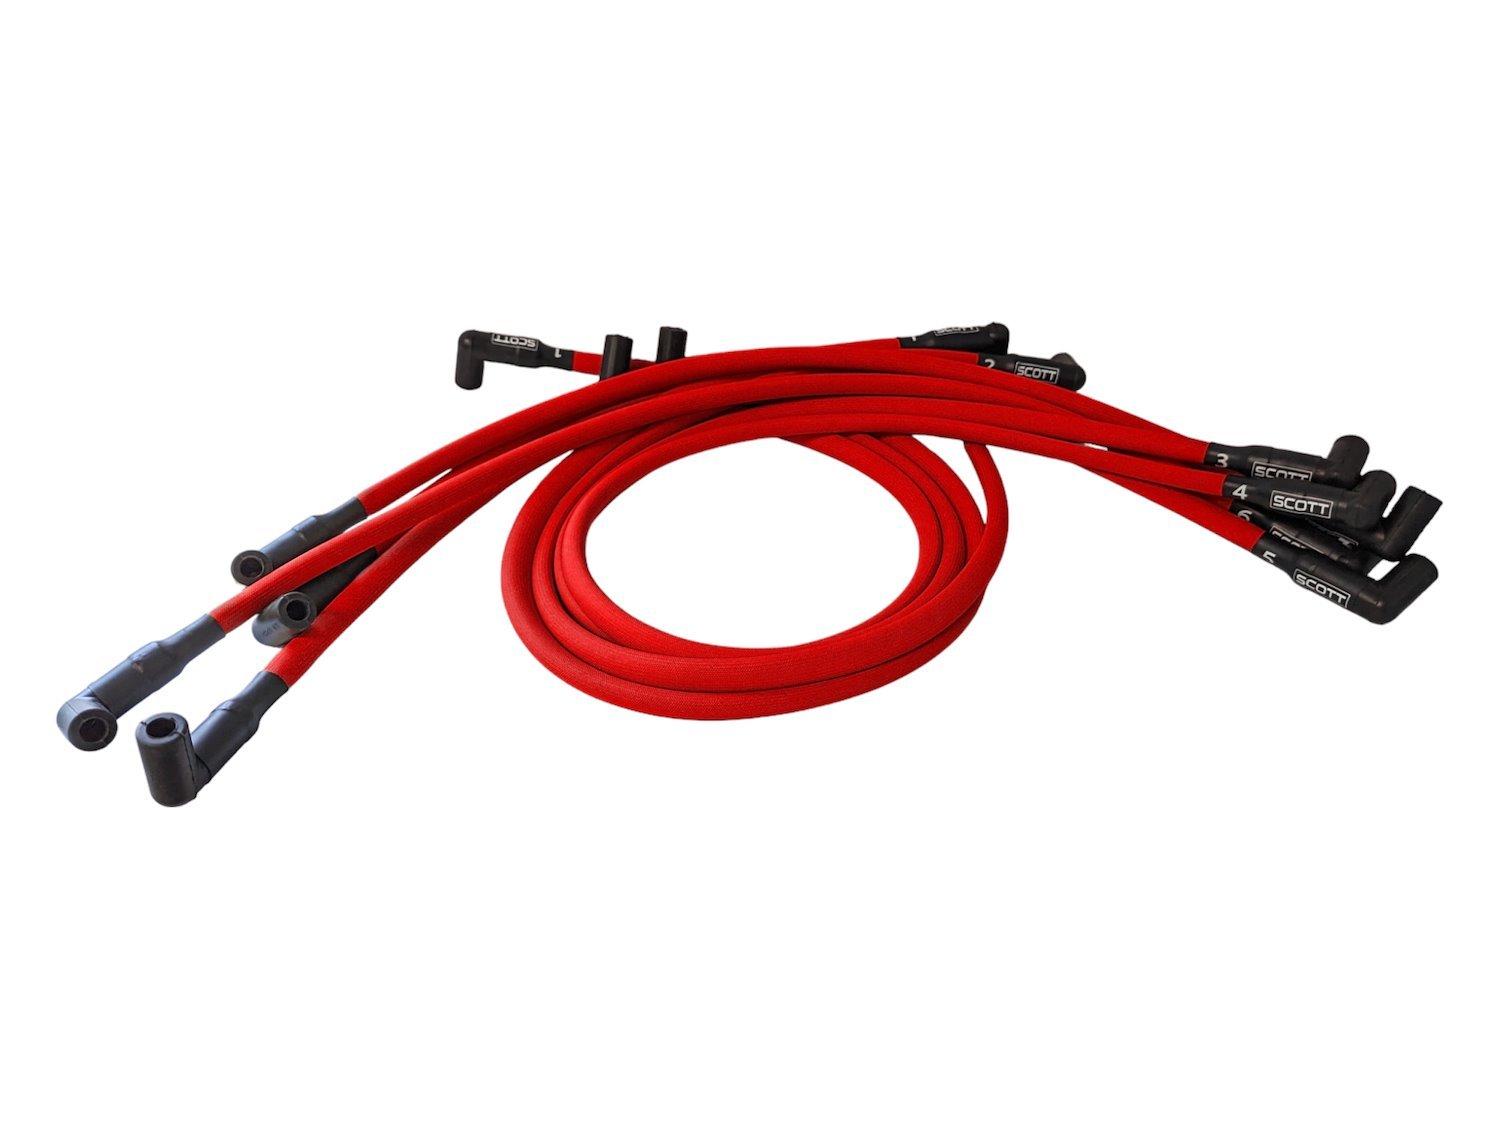 SPW-PS-416-2 High-Performance Fiberglass-Oversleeved Spark Plug Wire Set for Big Block Chevy, Under Header [Red]